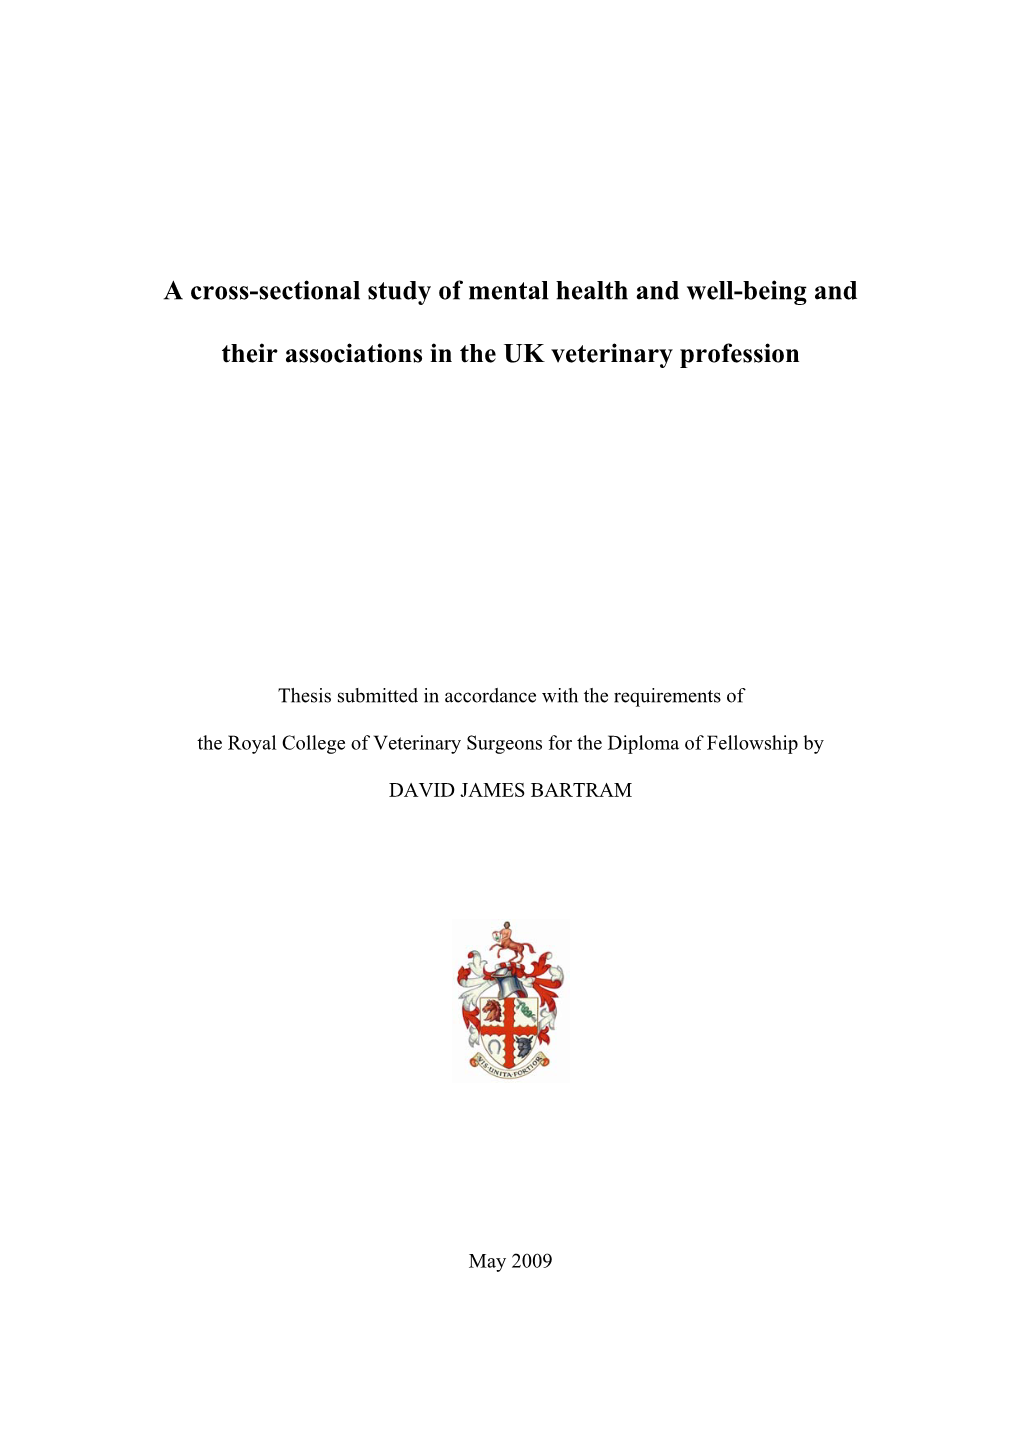 A Cross-Sectional Study of Mental Health and Well-Being and Their Associations in the UK Veterinary Profession